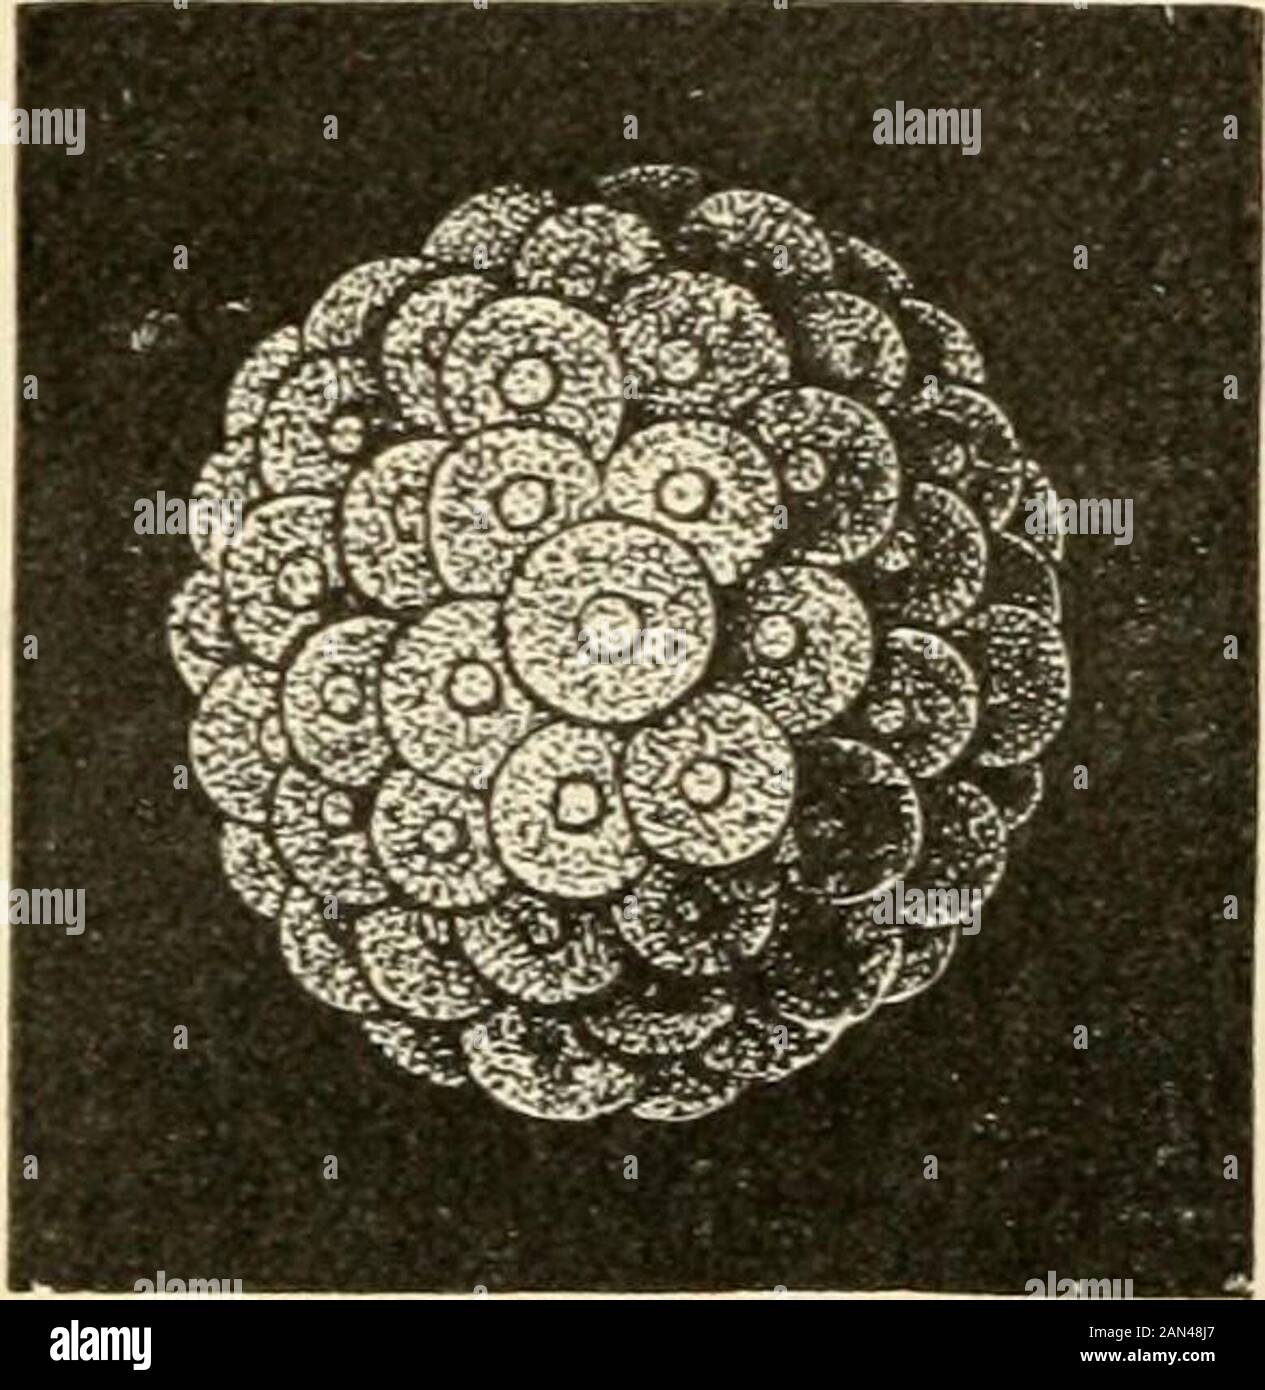 The evolution of man: a popular exposition of the principal points of human ontogeny and phylogenyFrom the German of Ernst Haeckel . Fig. 169.—Orif^inal or primordial egg-cleavage. The parent-cell, orcytula, which resulted from the fertilization of the egg-cell, first breaks up,by a continuous and regular process of dirisiou, into two cells (.4), then intofour (B), then into eight (C), and, lastly, into very numerous cleavage-cells (/)). the Morula (Fig. 165), the parent-cell breaks up, by repeateddivision, into numerous cells. We have already minutelyexamined this important process ofegg-clea Stock Photo